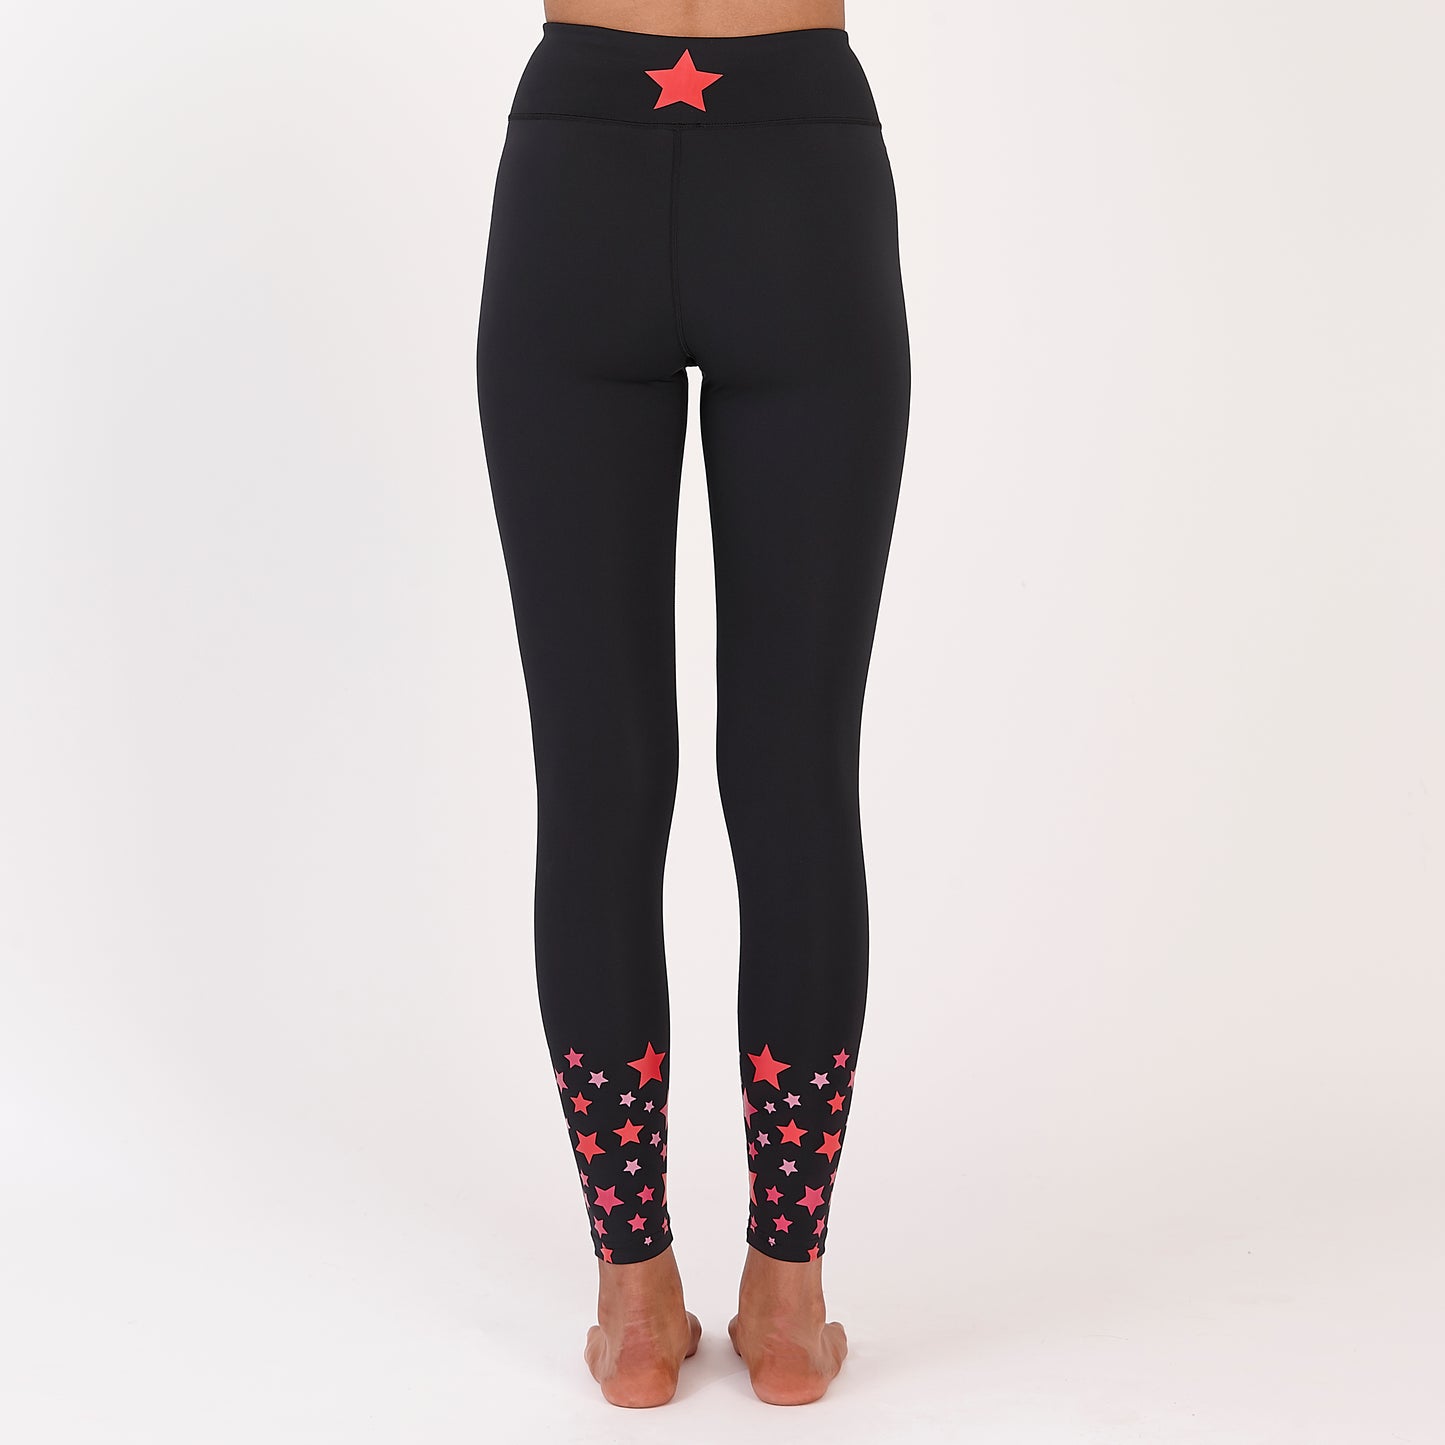 Black Gym Leggings With Pink & Red Ankle Stars